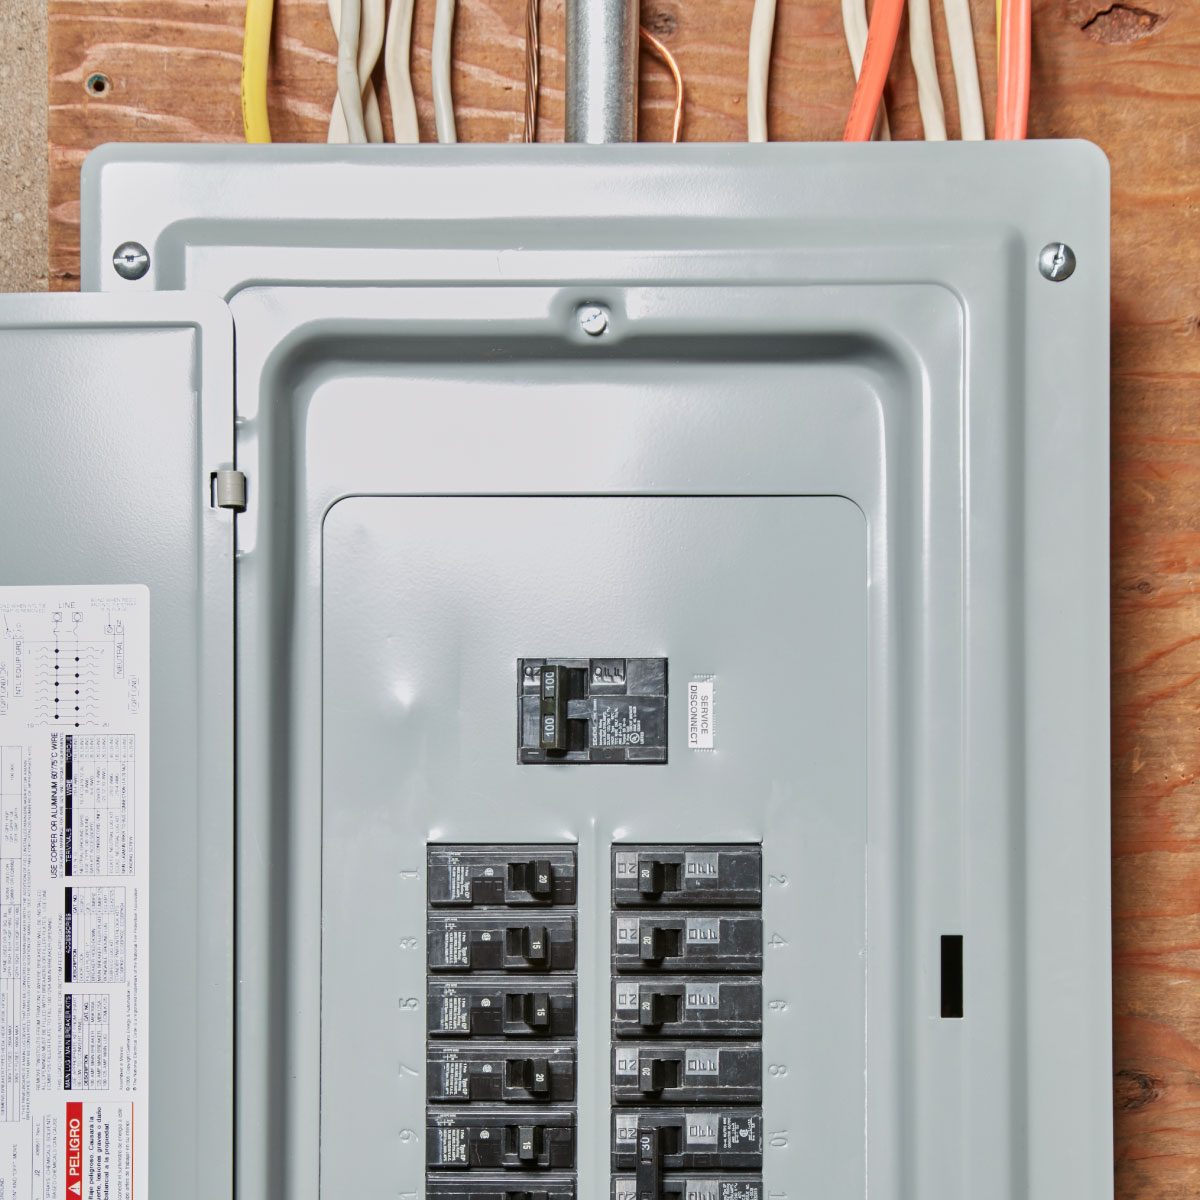 How to Reset a Tripped Circuit Breaker